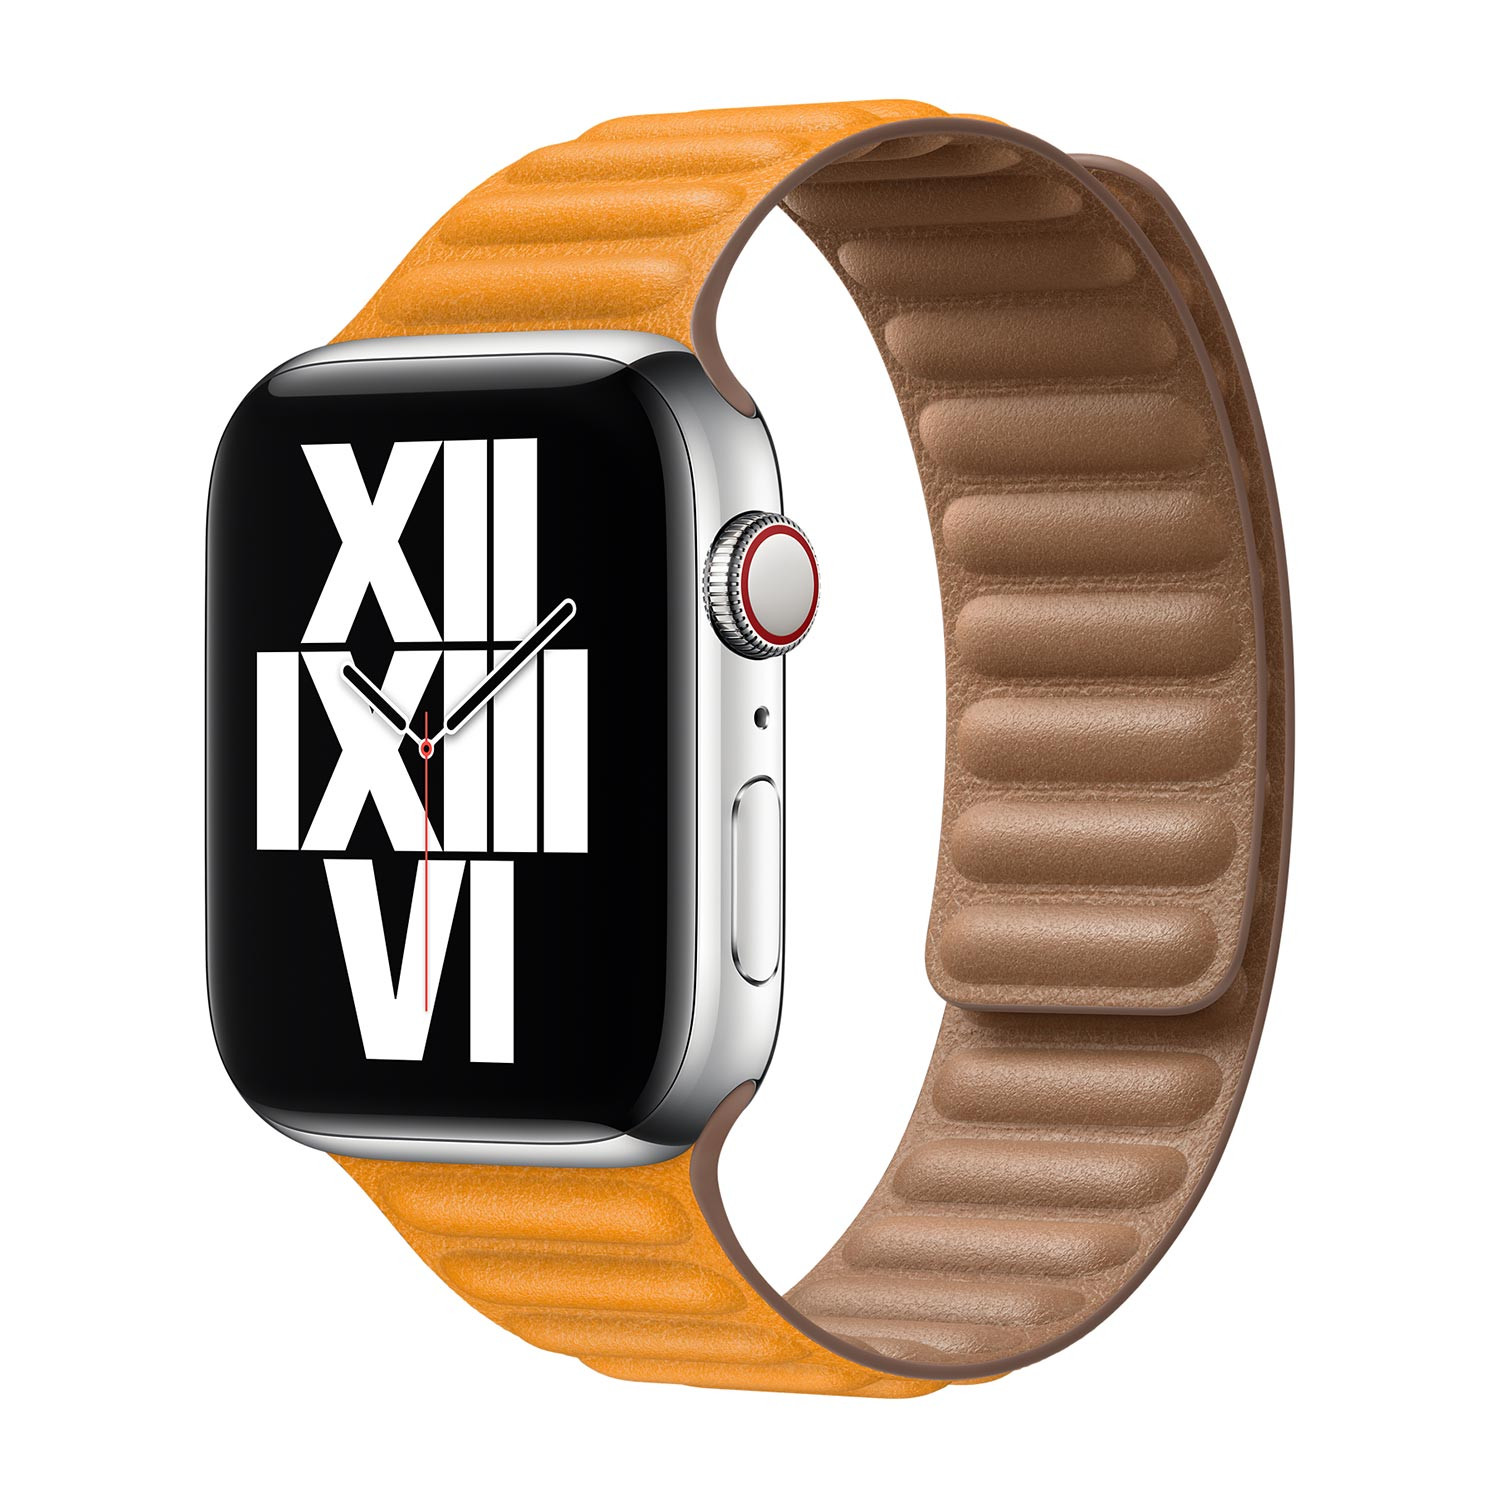 Storm Grey Leather Link Band for Apple Watch - iSTRAP